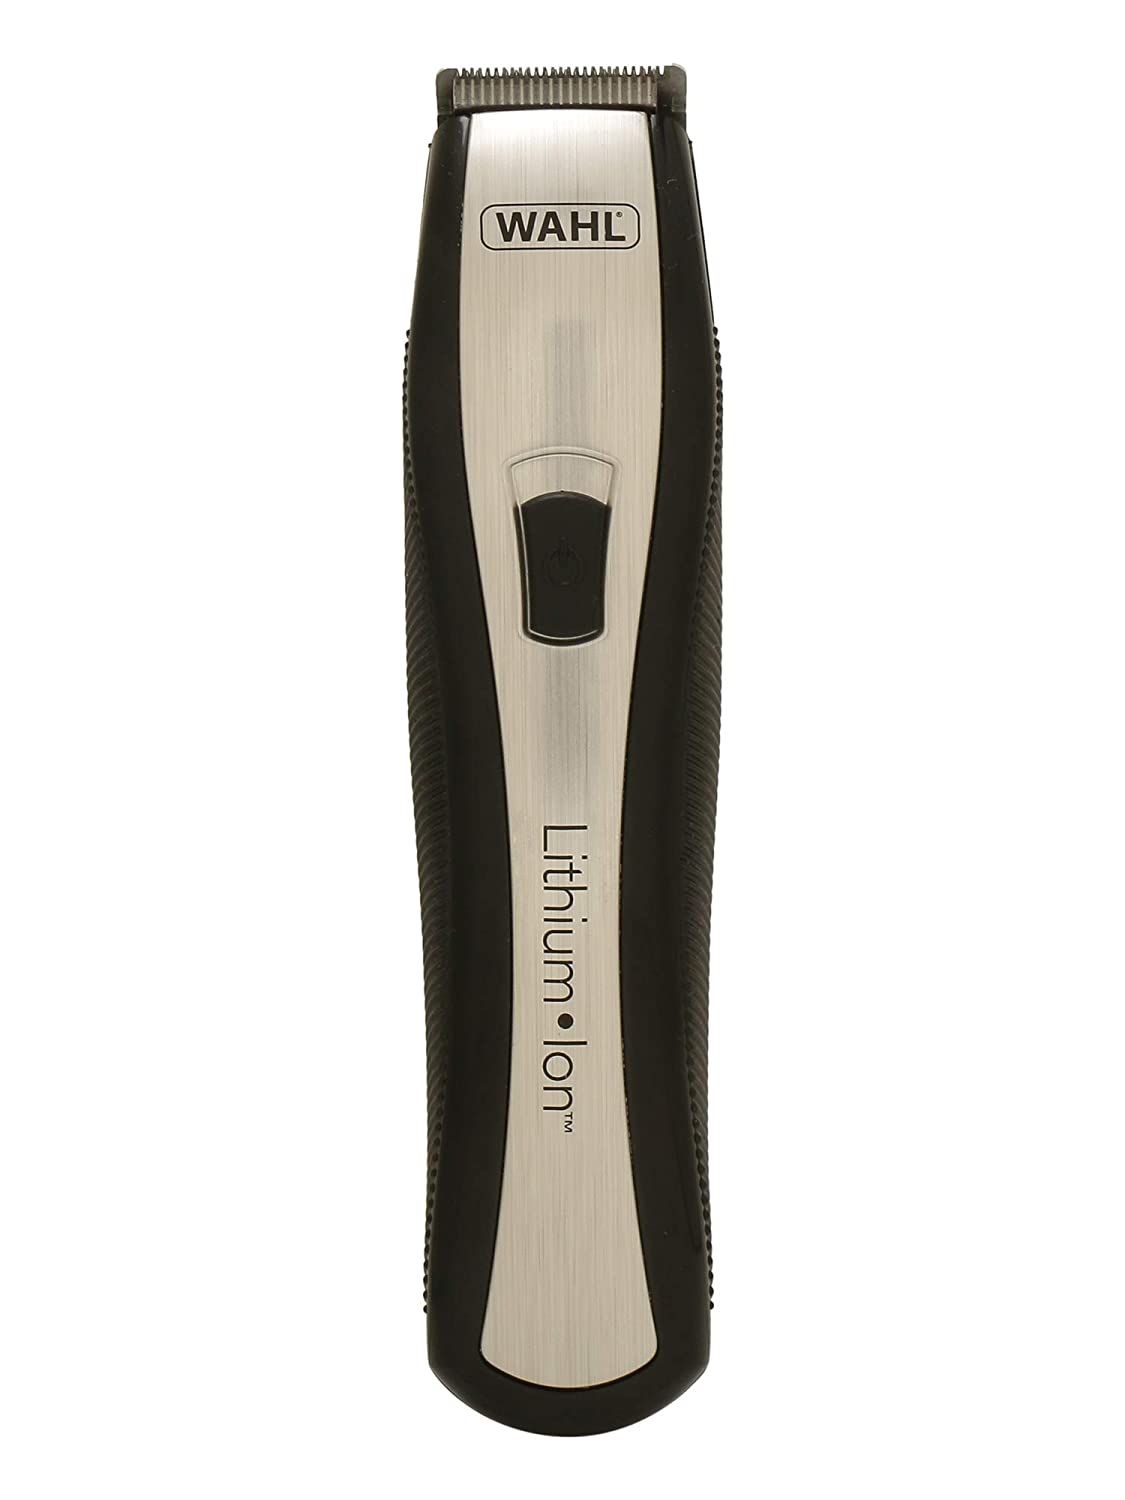 Wahl Lithium Ion Trimmer (01541-0011)